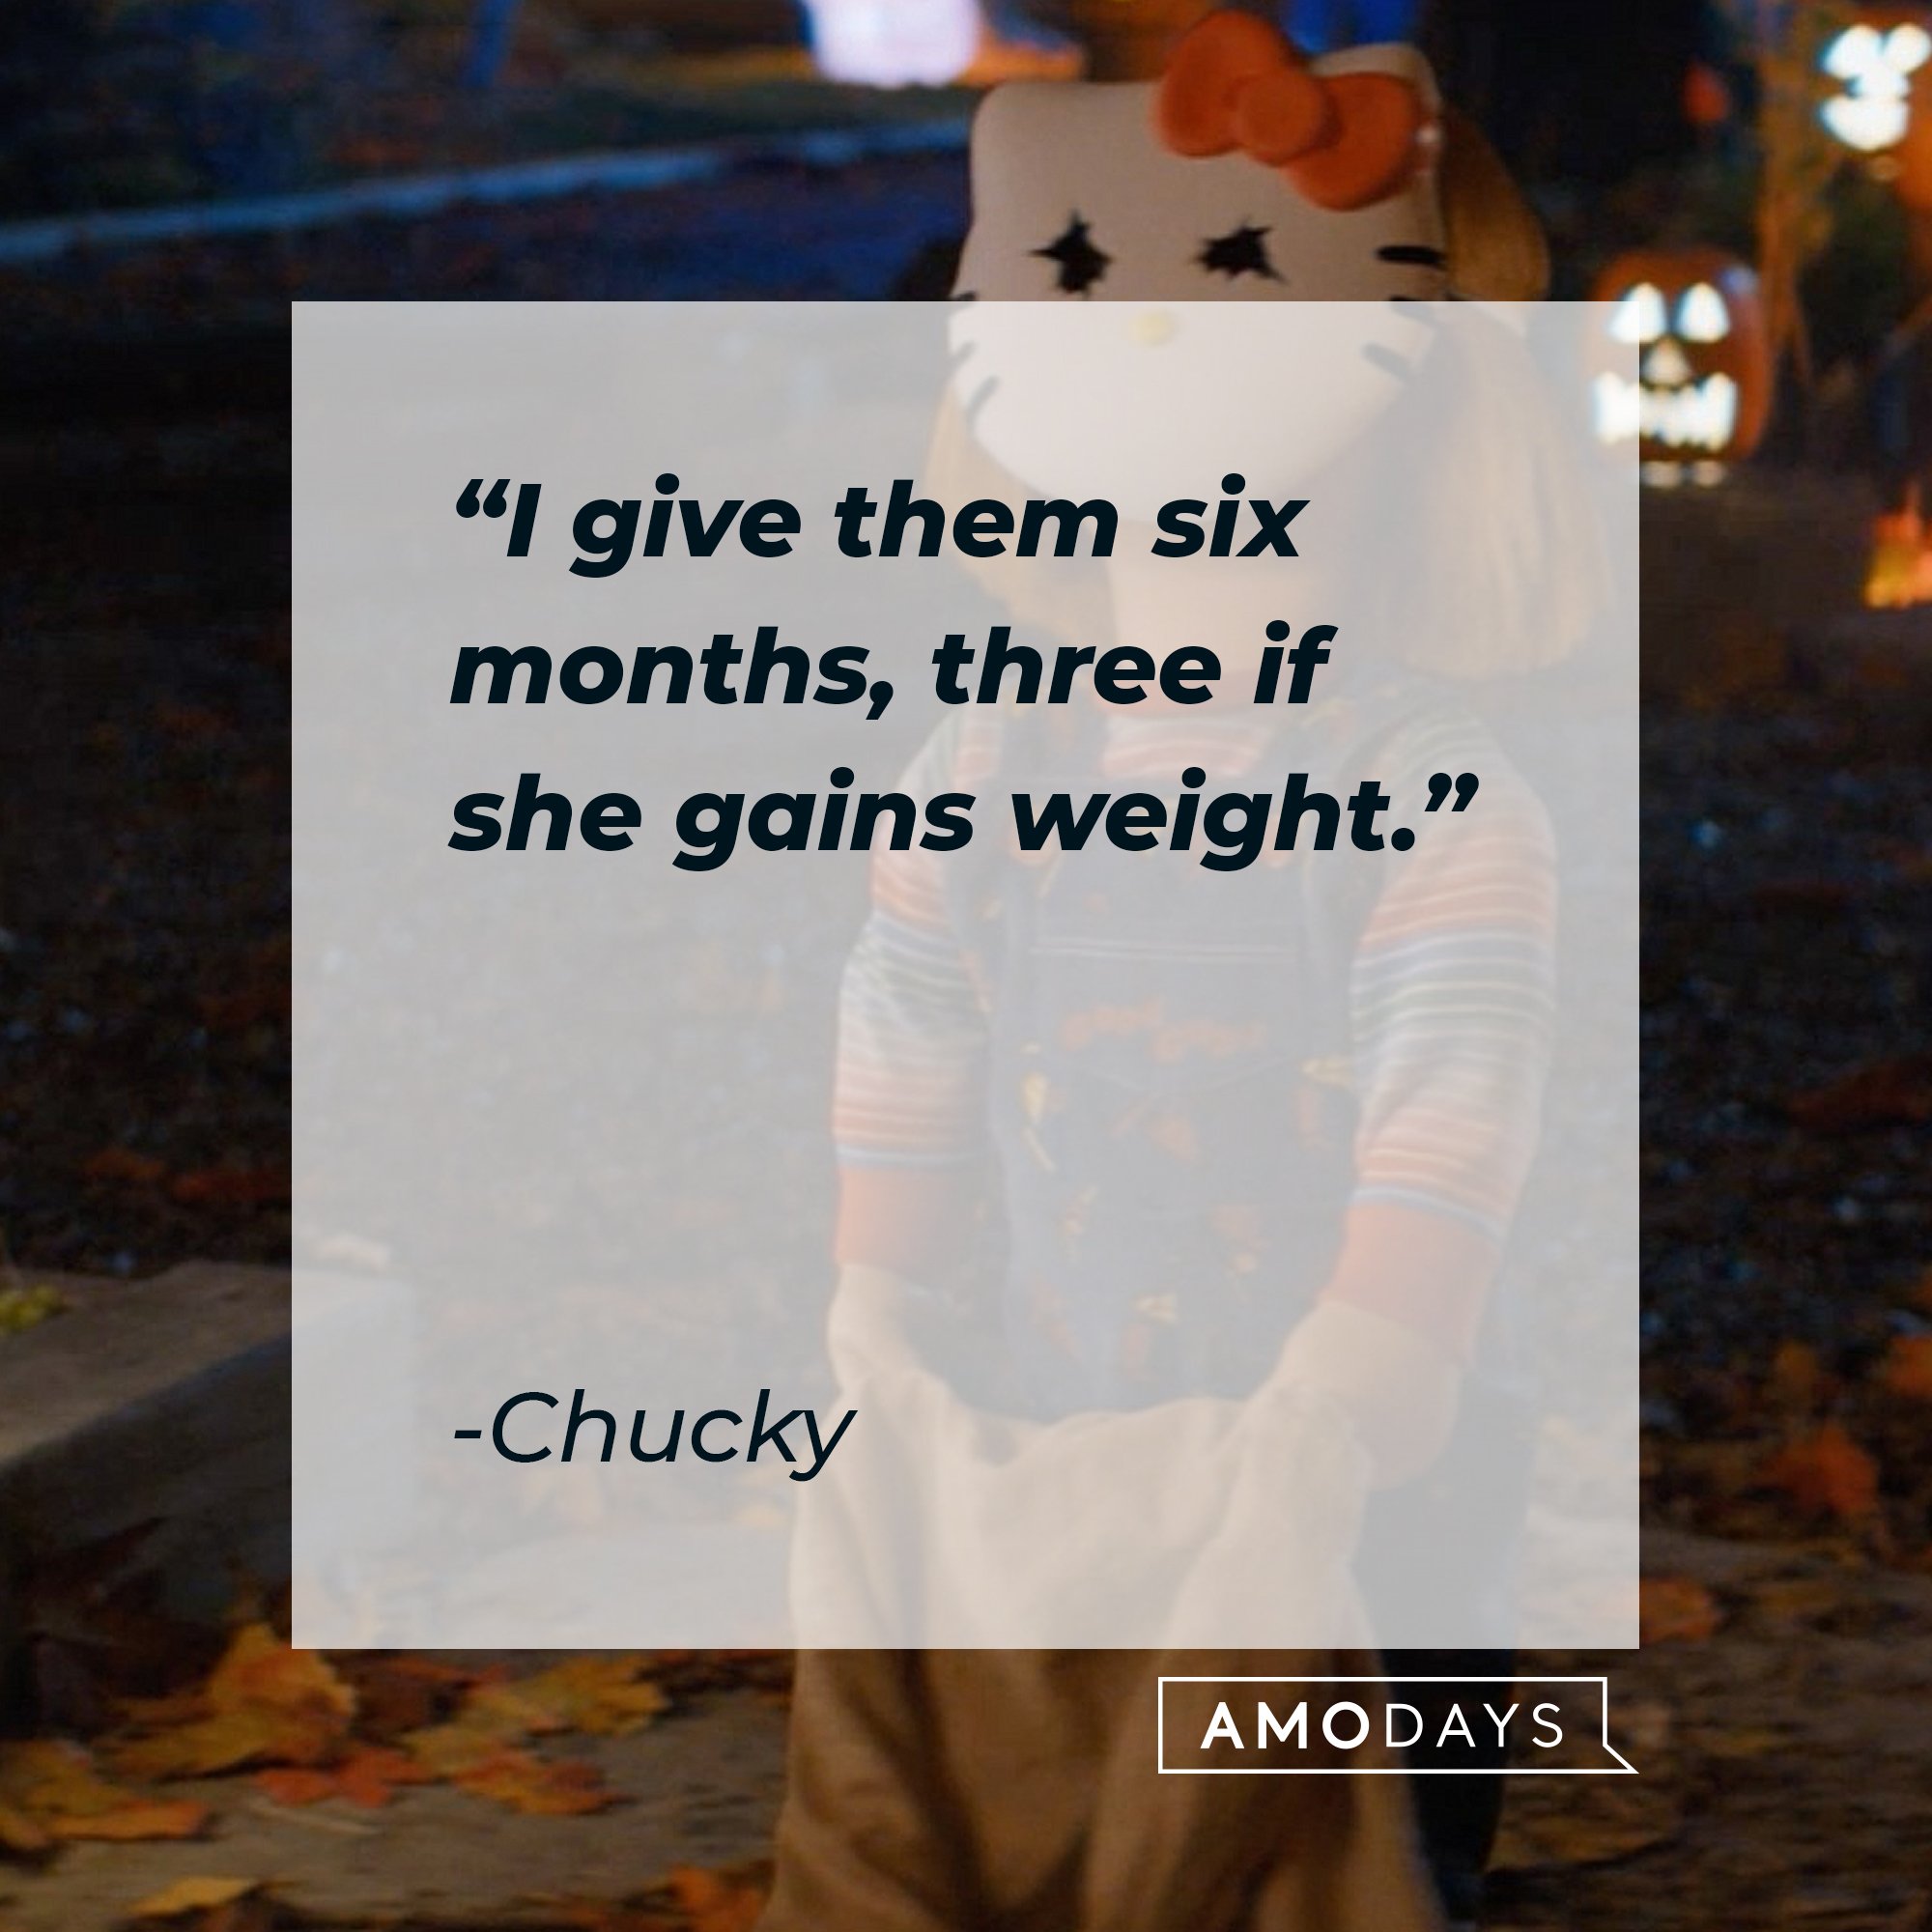 Chucky's quote: "I give them six months, three if she gains weight." | Image: AmoDays